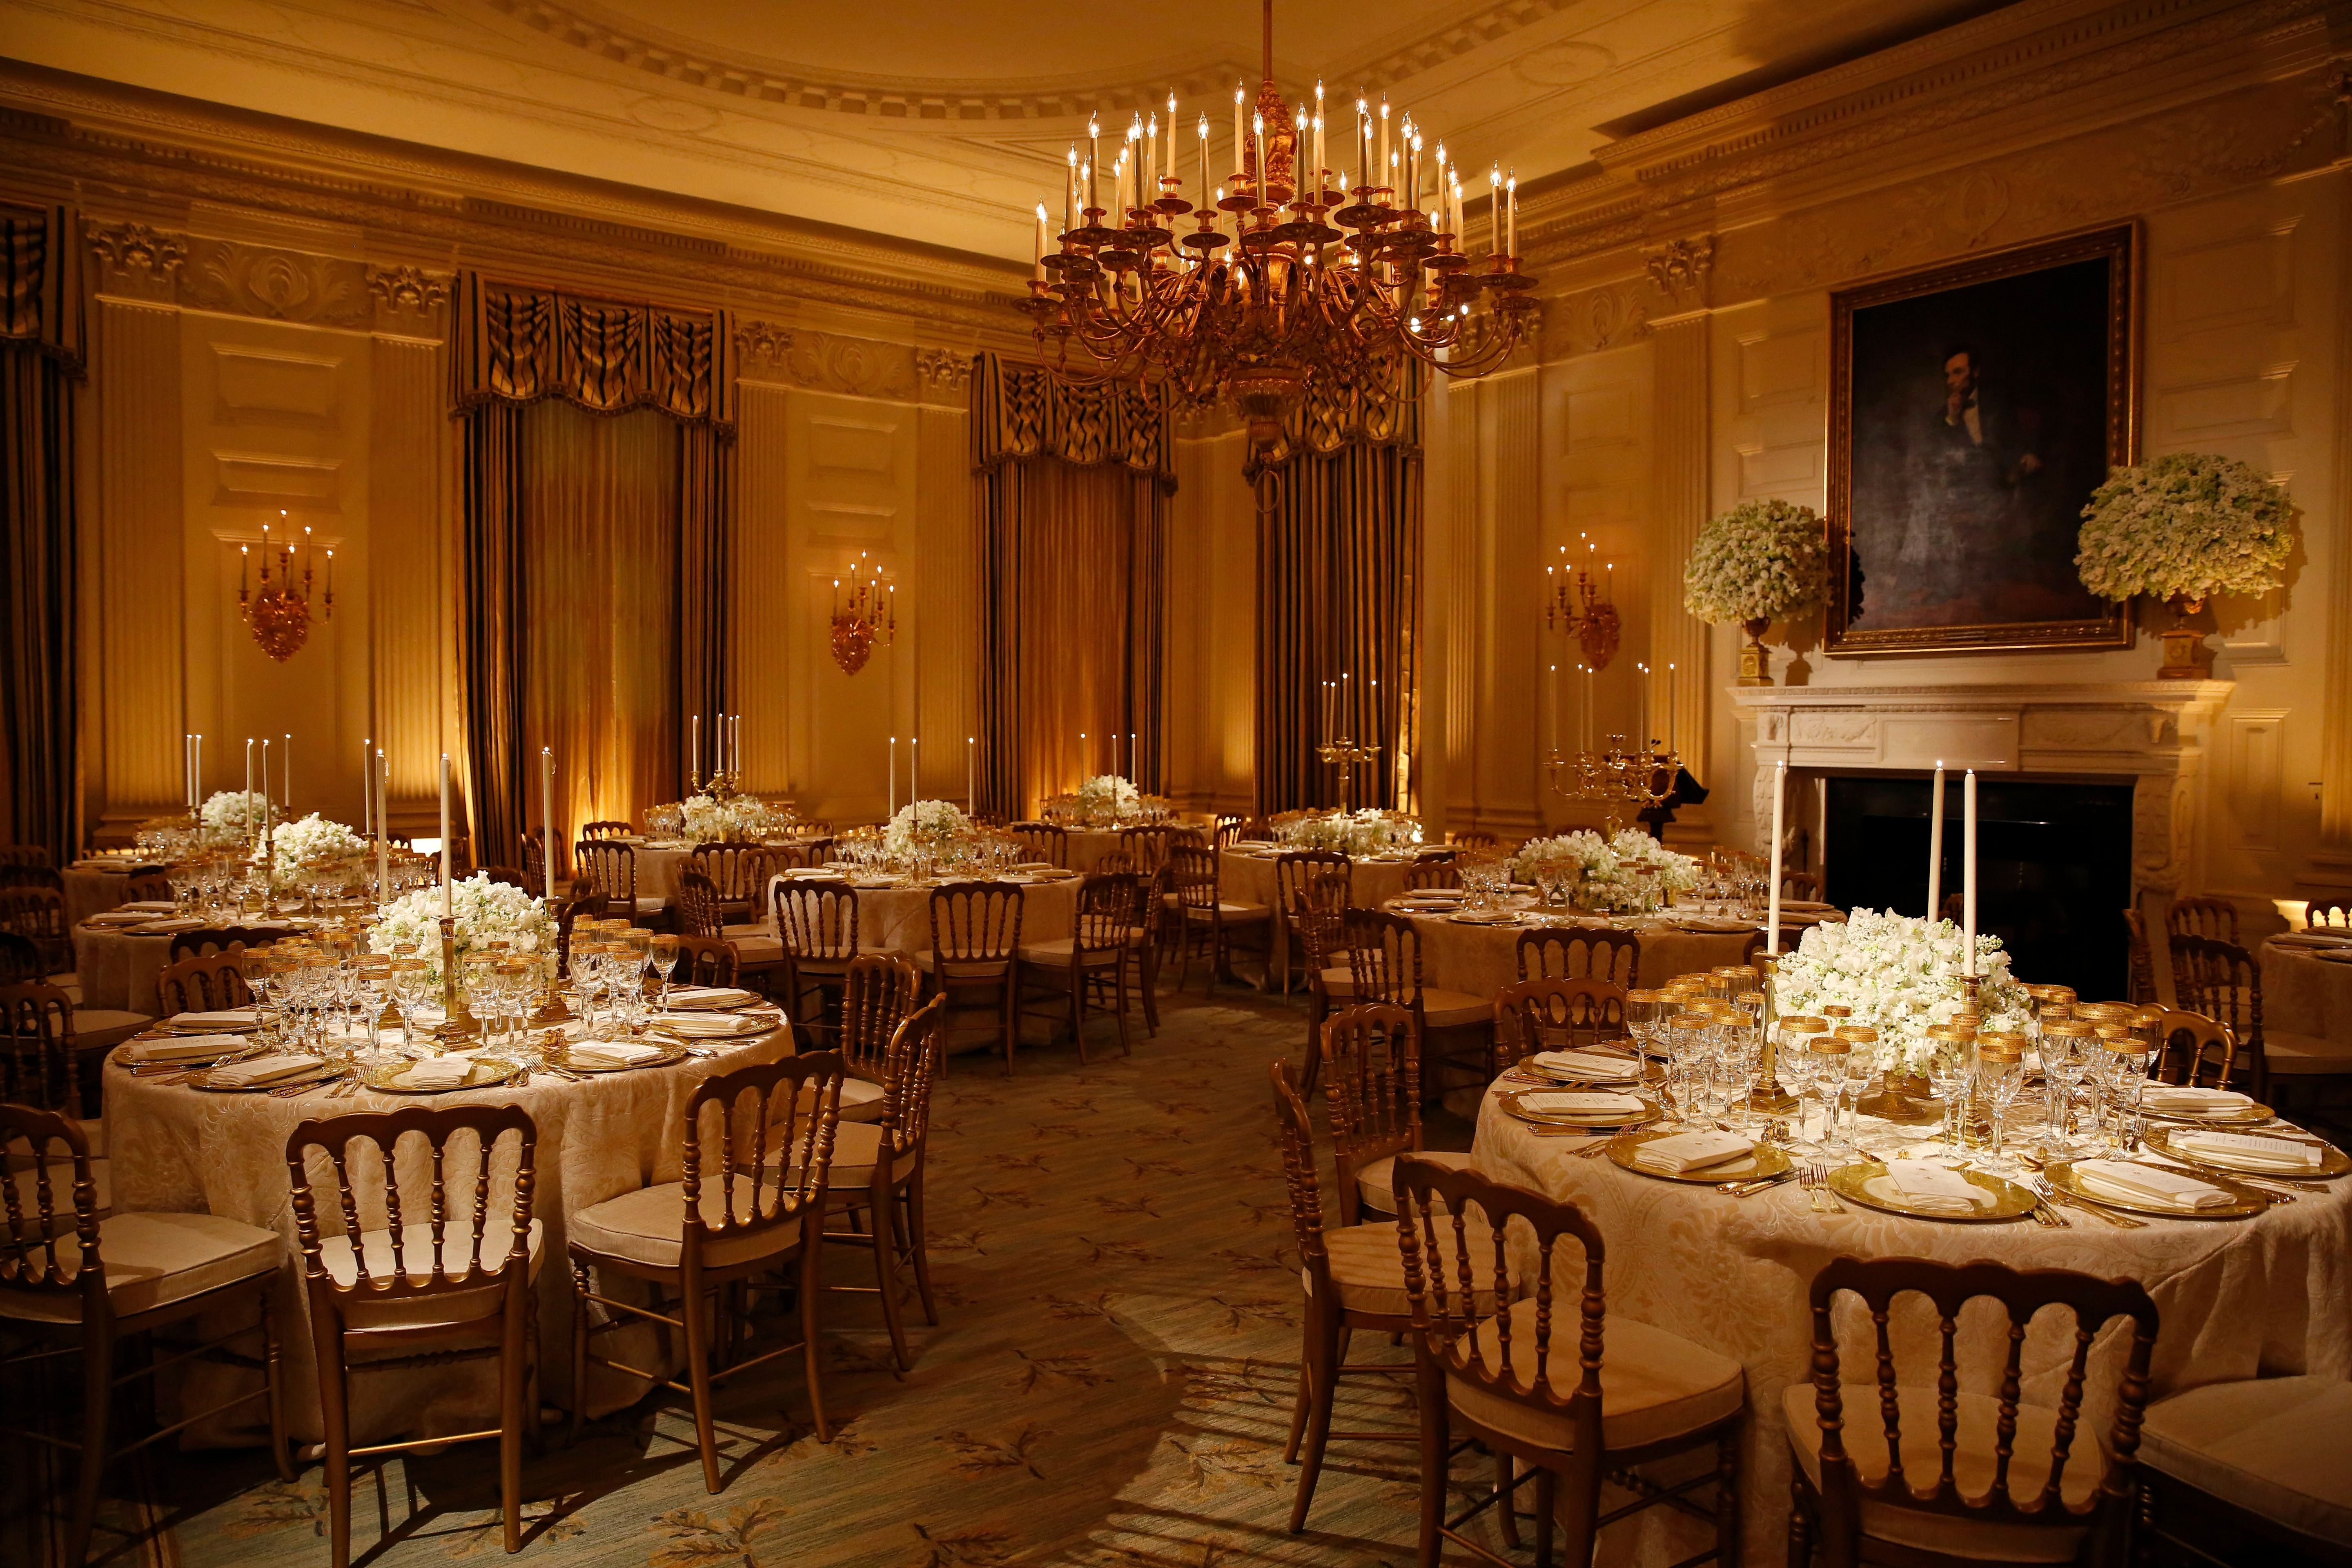 White House Dinner Etiquette Rules Everyone Must Follow | Reader's Digest